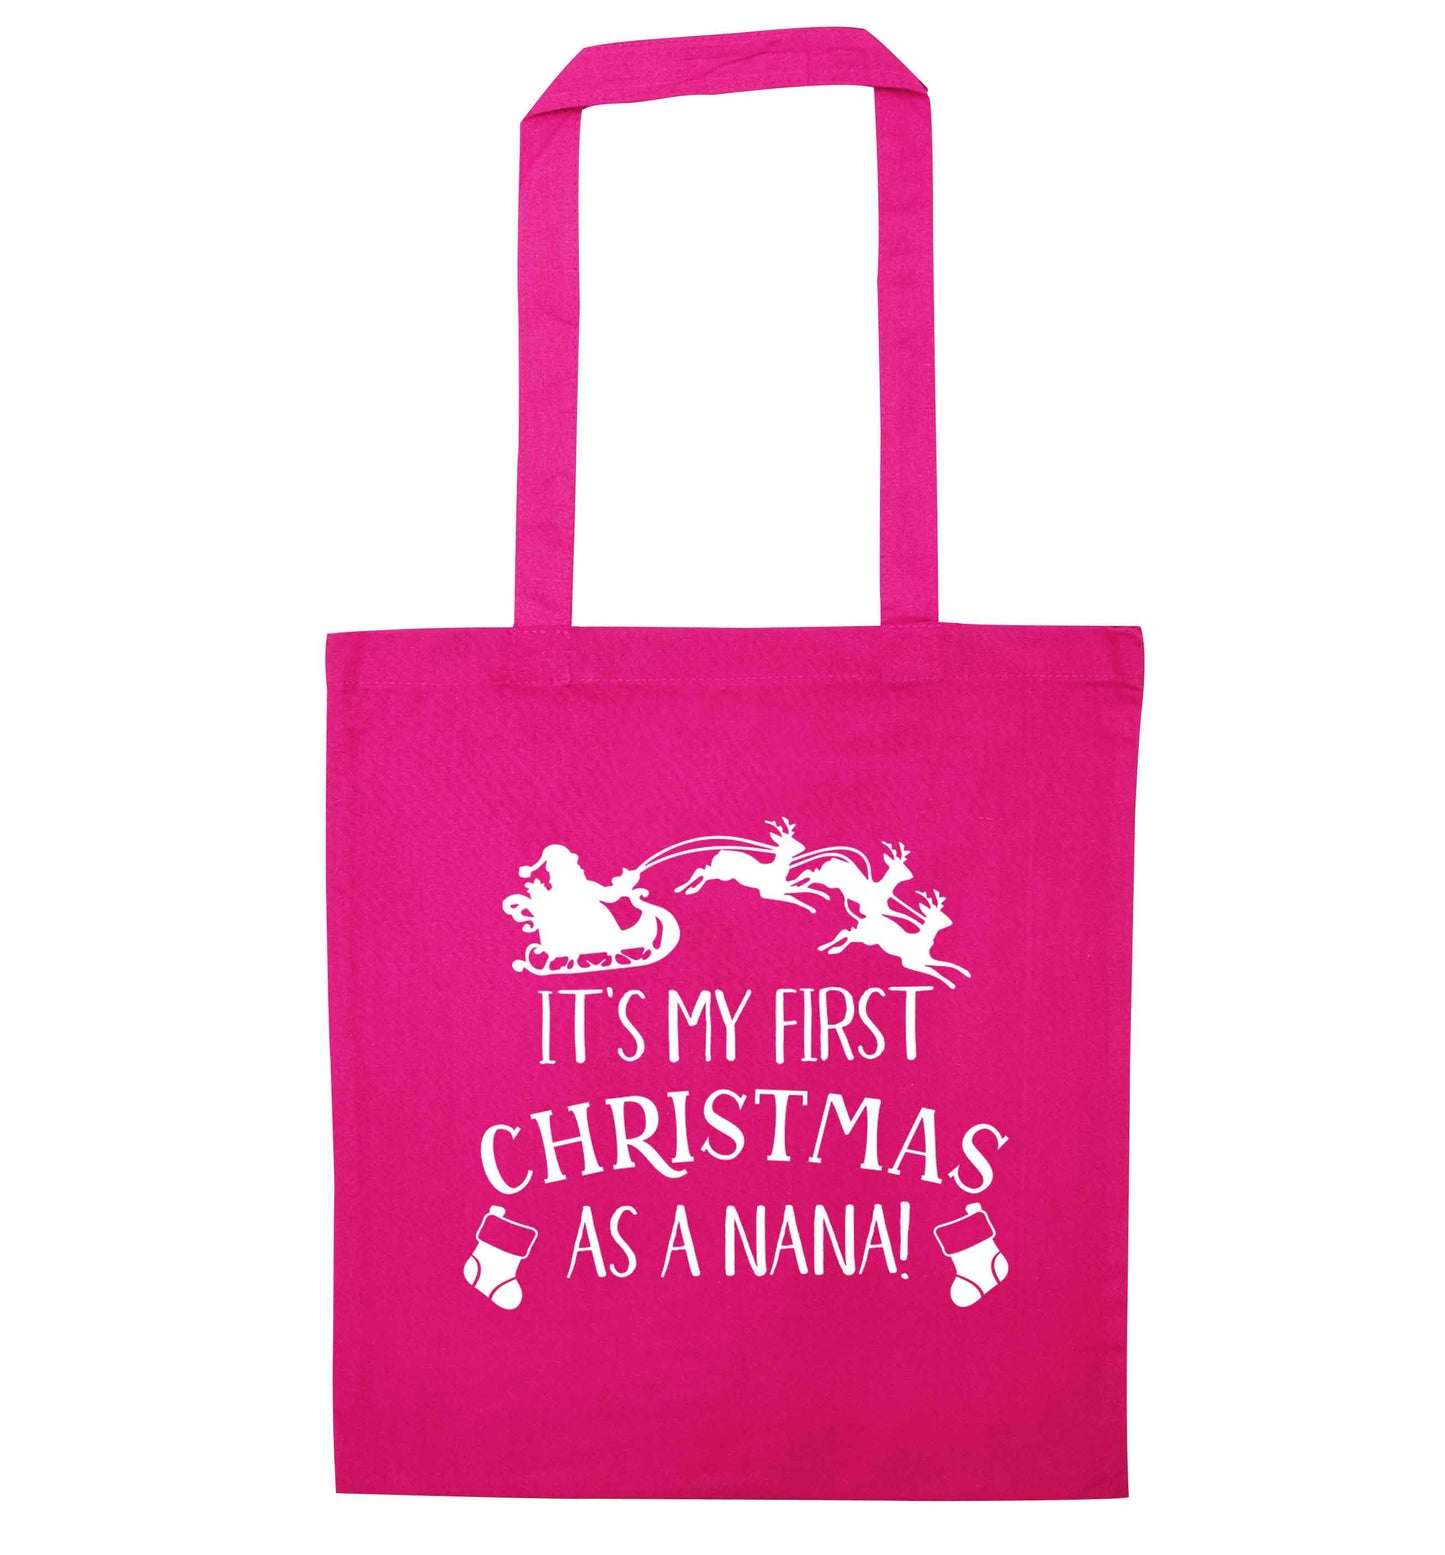 It's my first Christmas as a nana pink tote bag